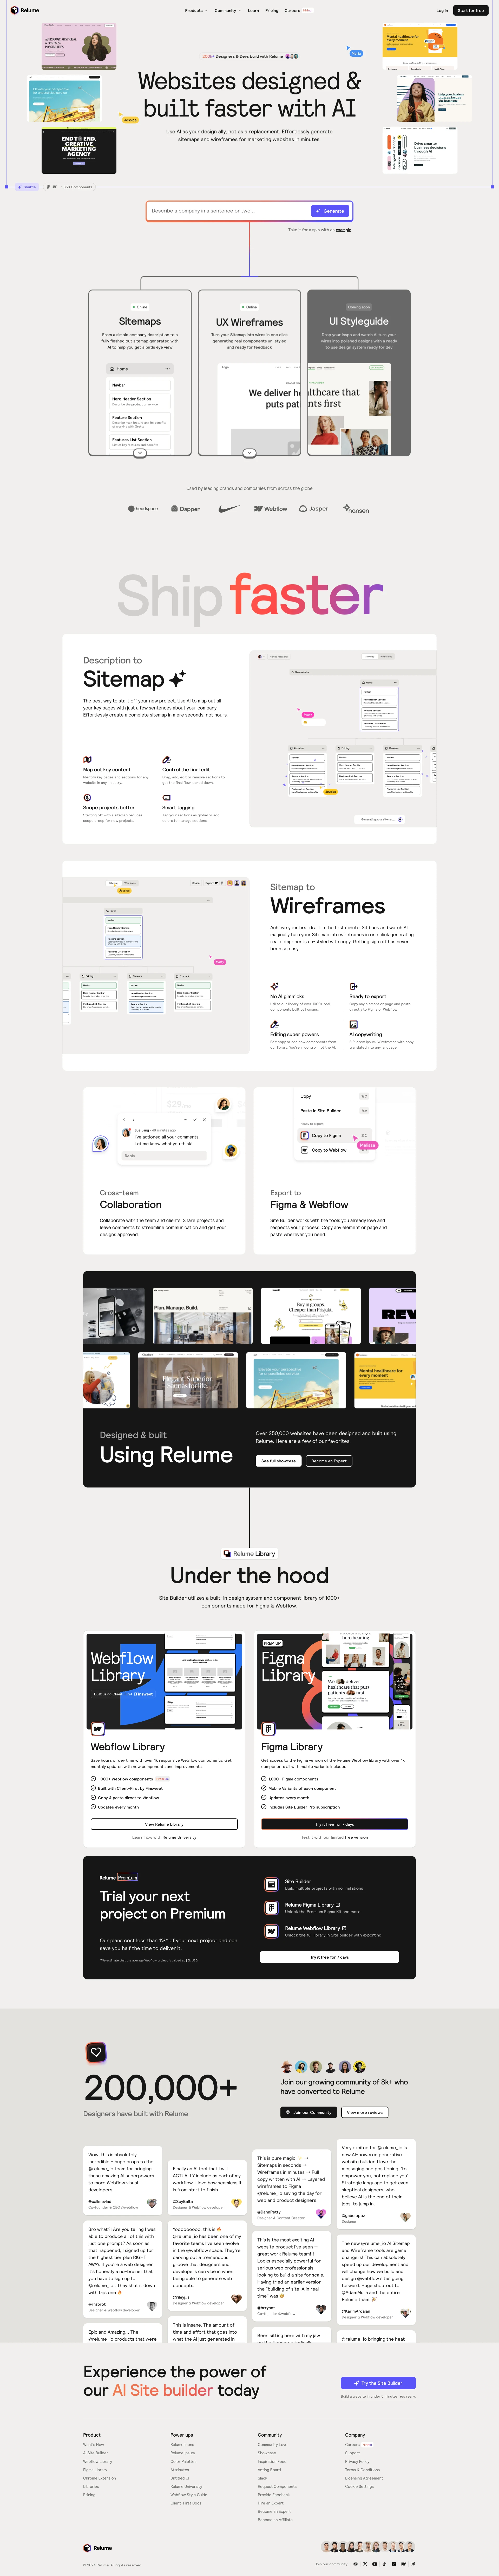 Relume Landing Page Example: Websites designed & built faster with AI. Use AI as your design ally, not as a replacement. Effortlessly generate sitemaps and wireframes for marketing websites in minutes with Relume’s AI website builder.